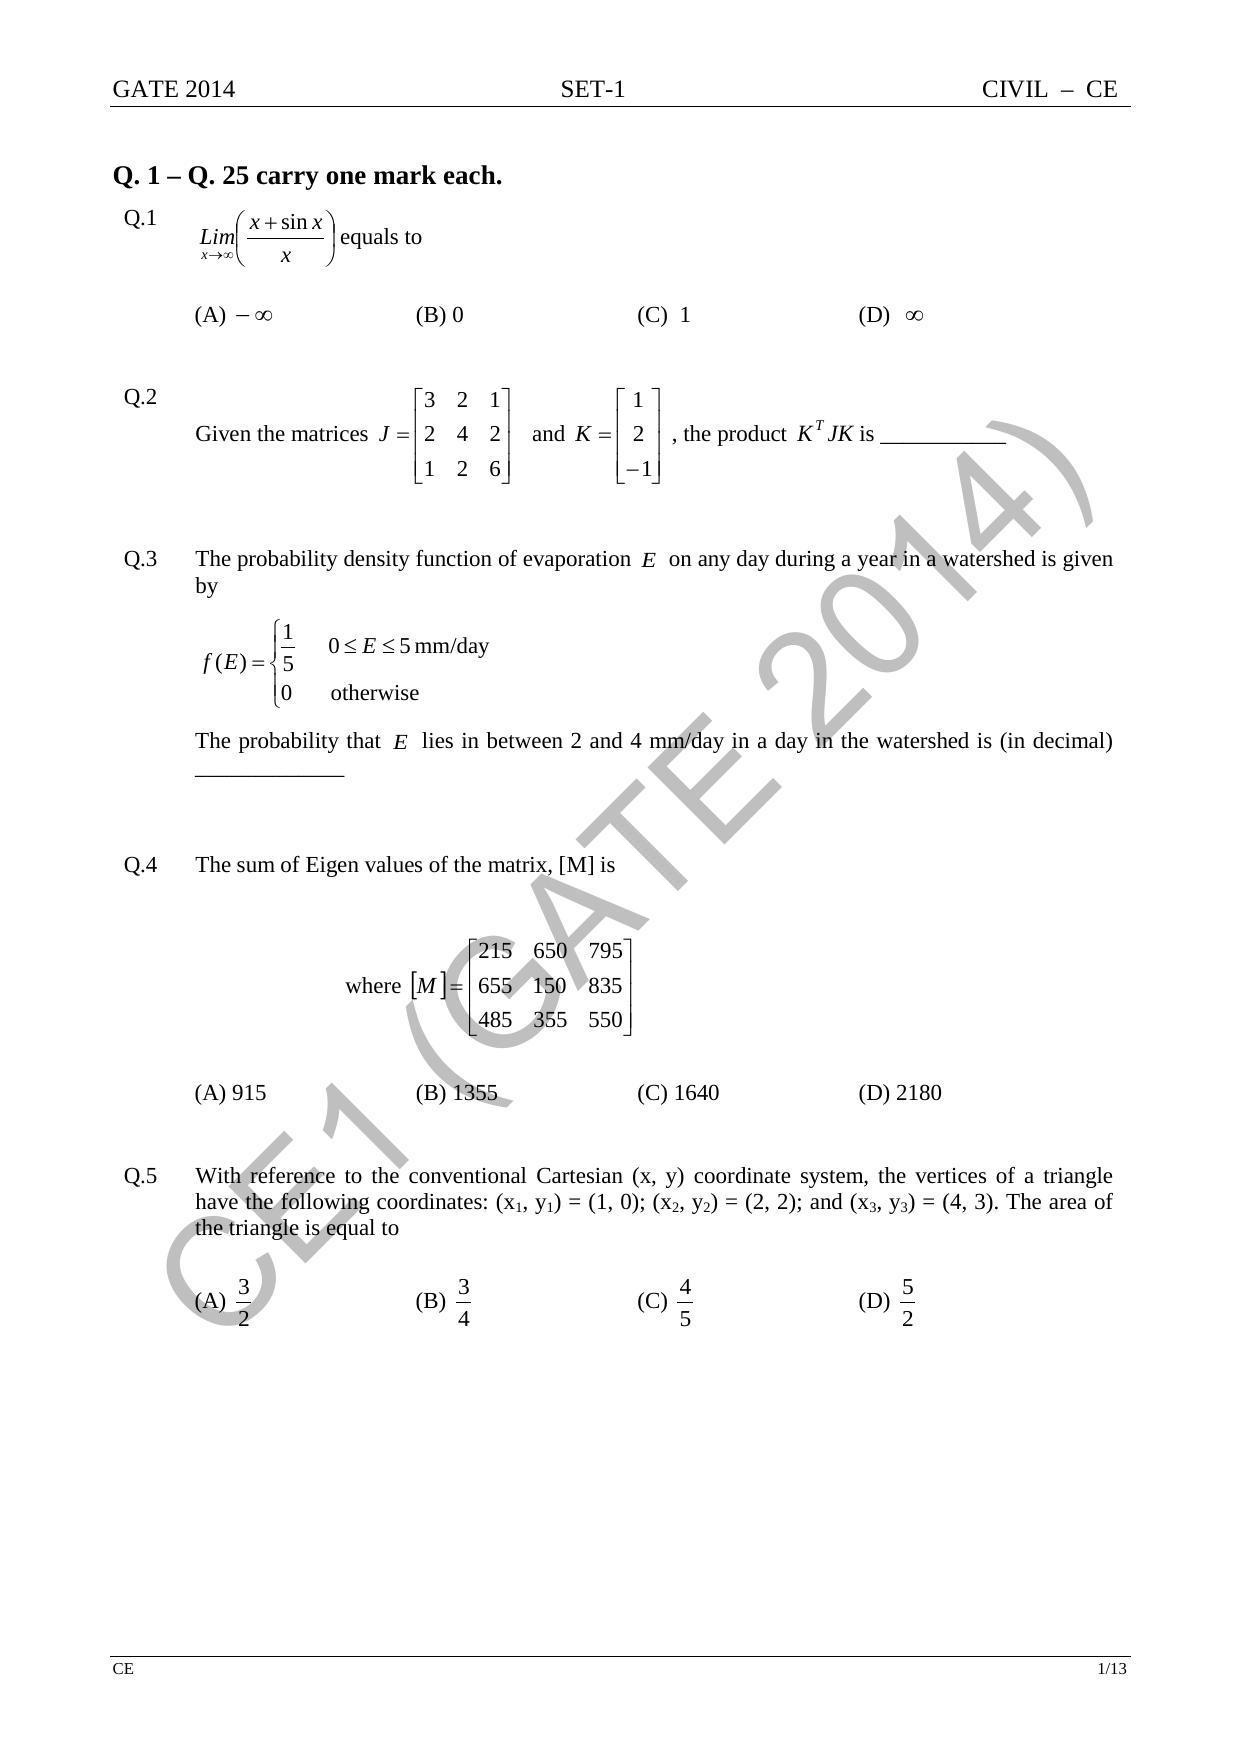 GATE 2014 Civil Engineering (CE) Question Paper with Answer Key - Page 8